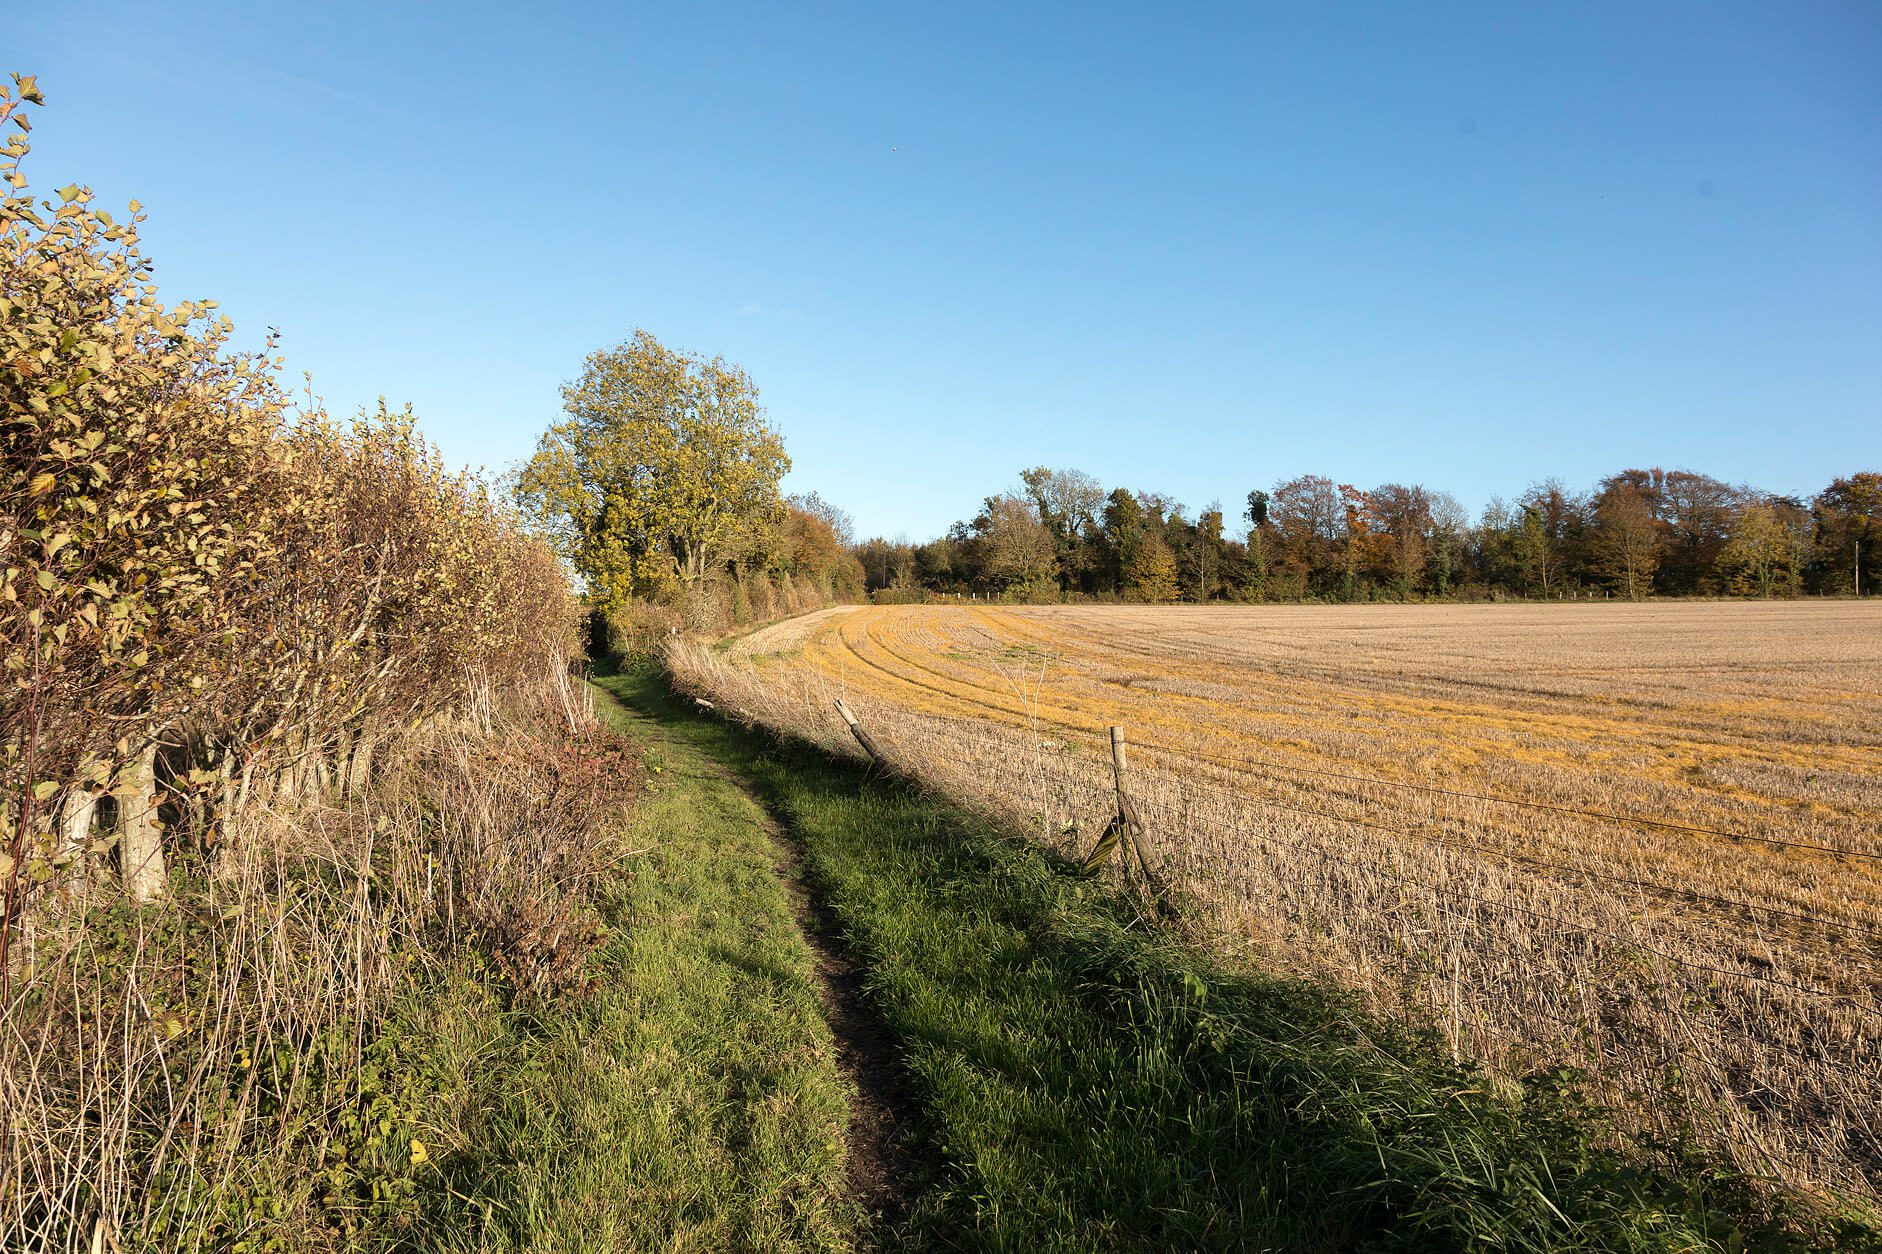 Walking route through countryside of Higham Park. With crop fields and trees in the distance.